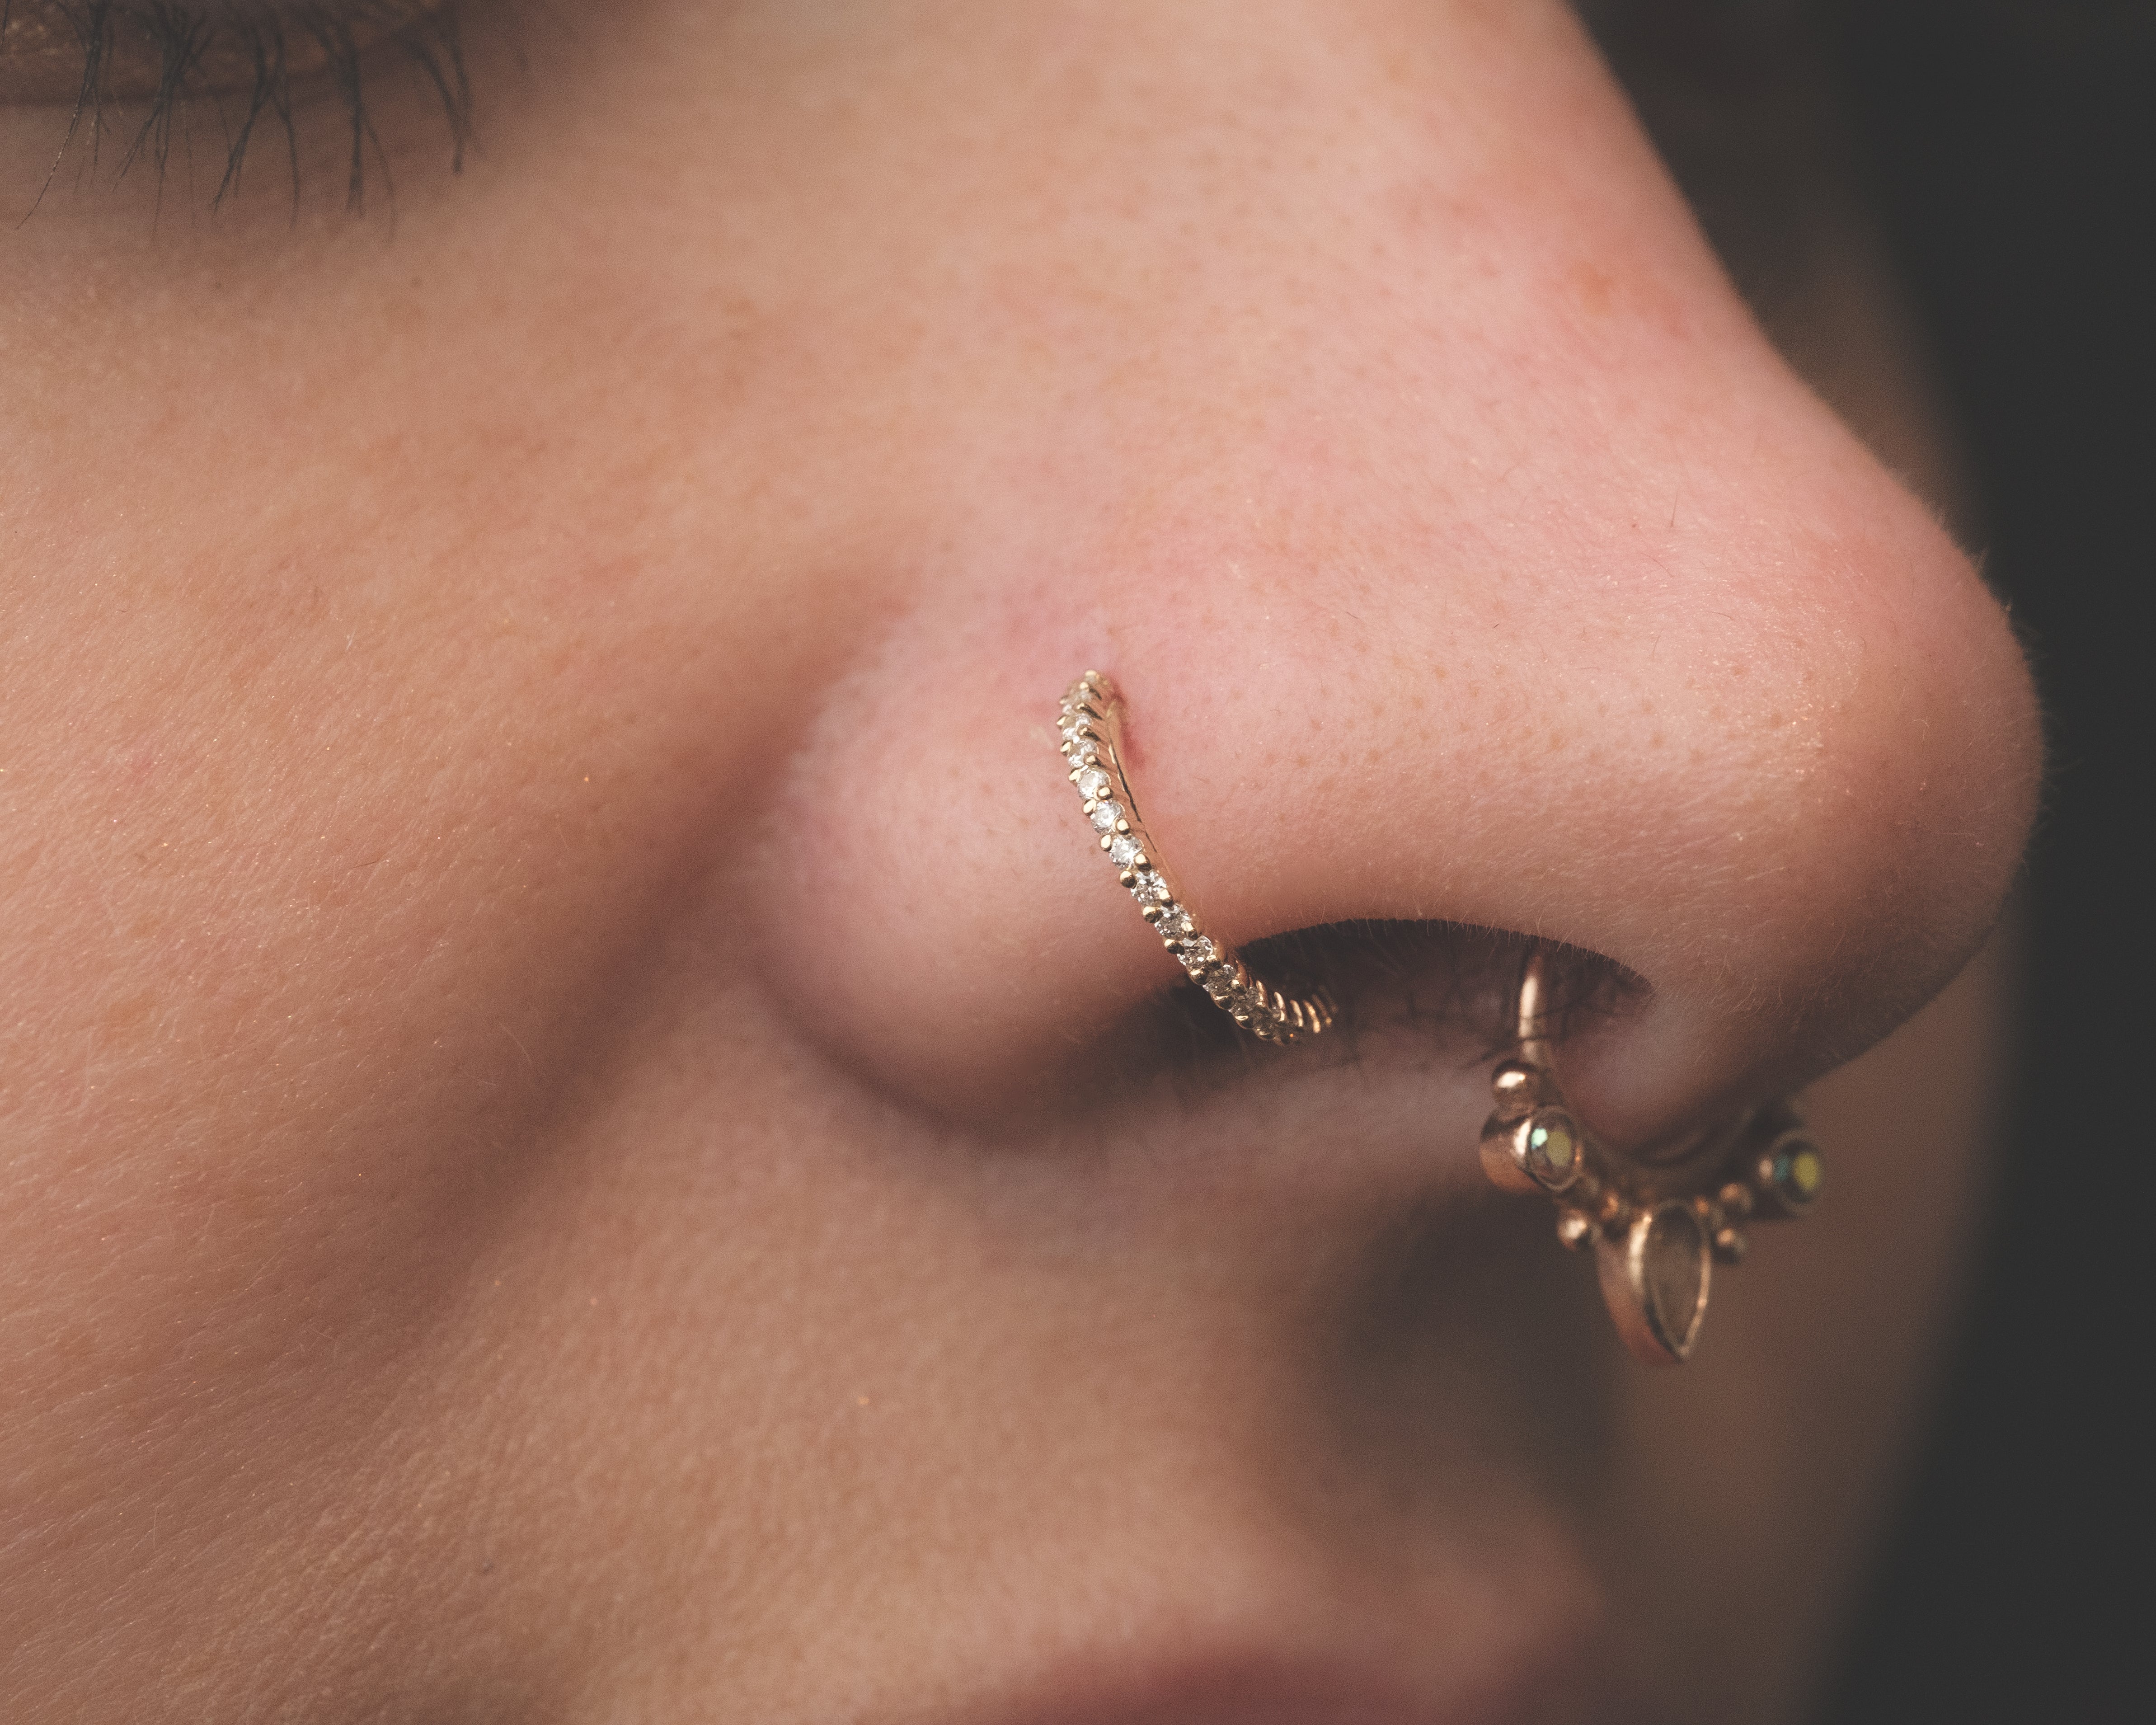 Will We Pierce Your Nose With a Ring?